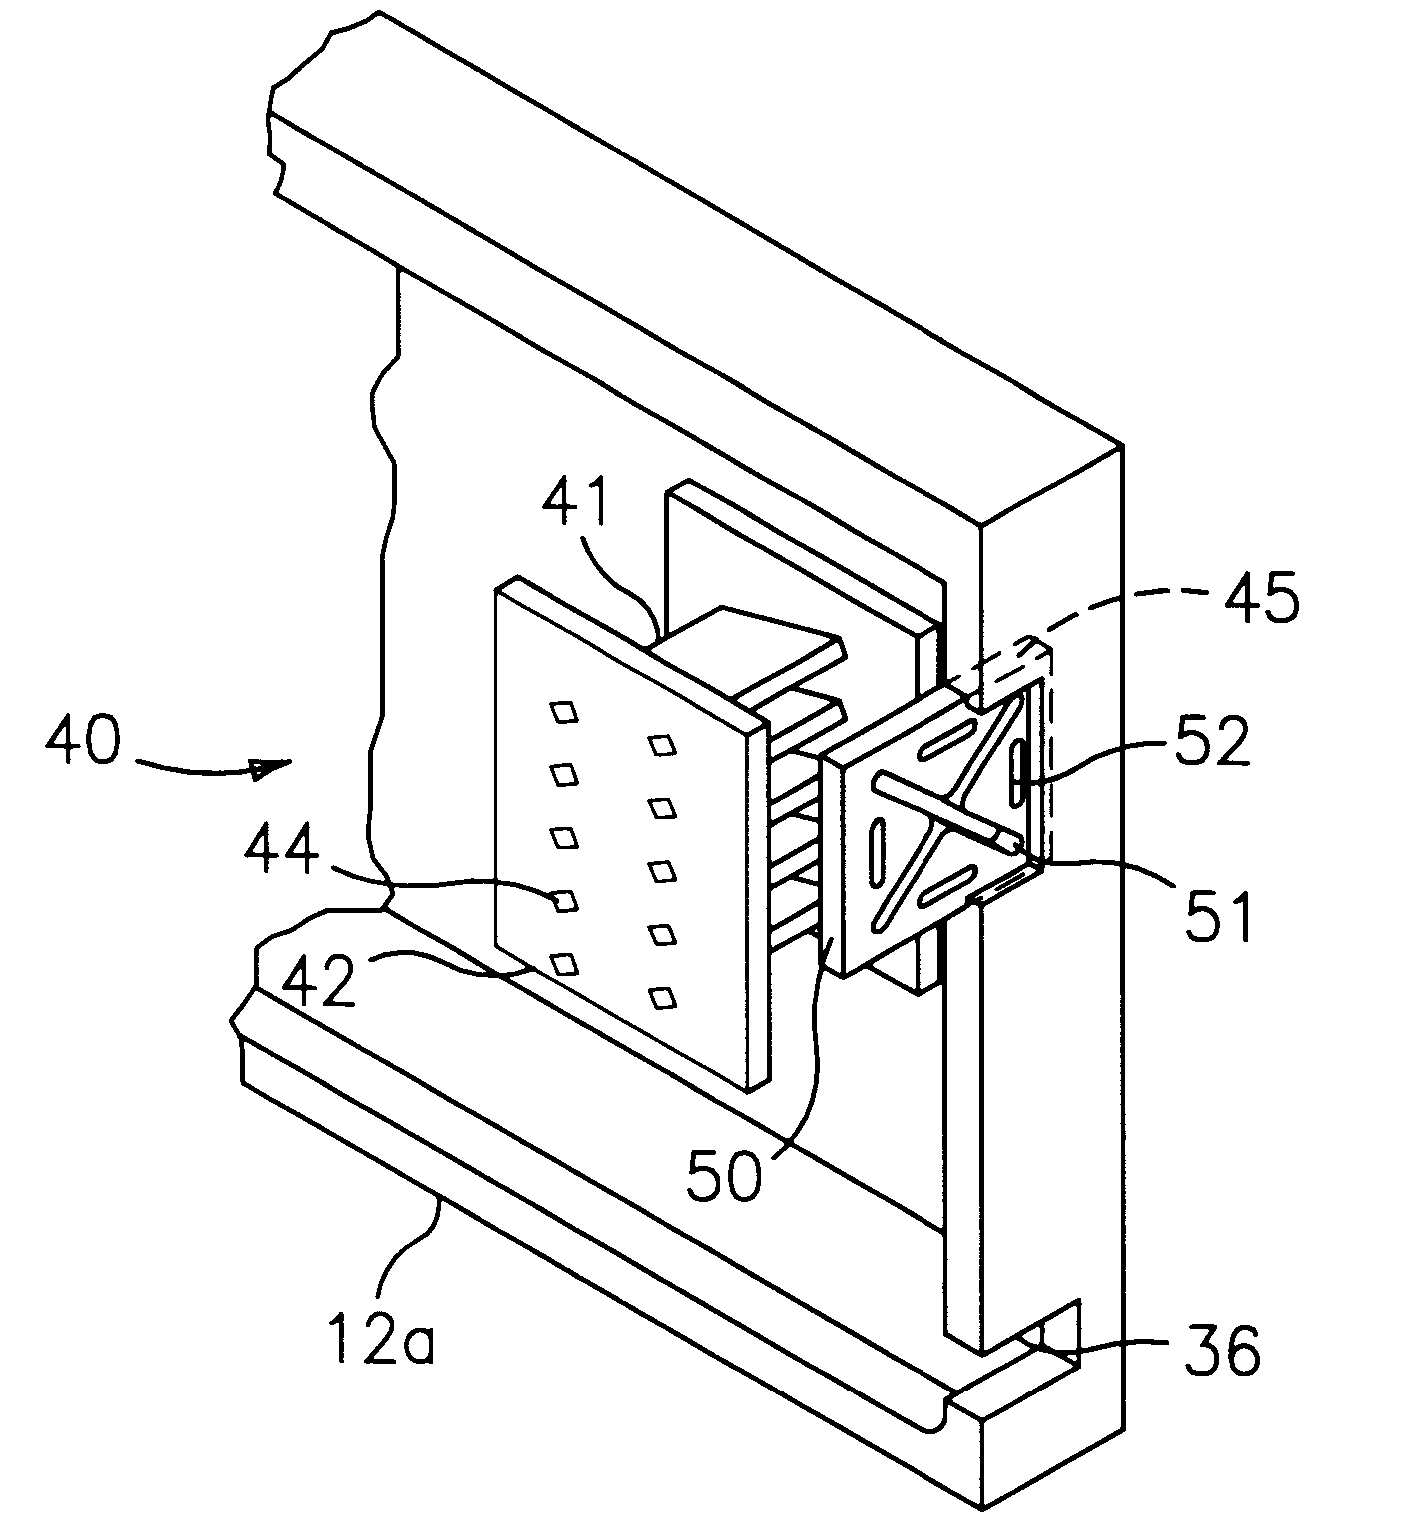 Circuit breaker arc exhaust baffle with variable aperture